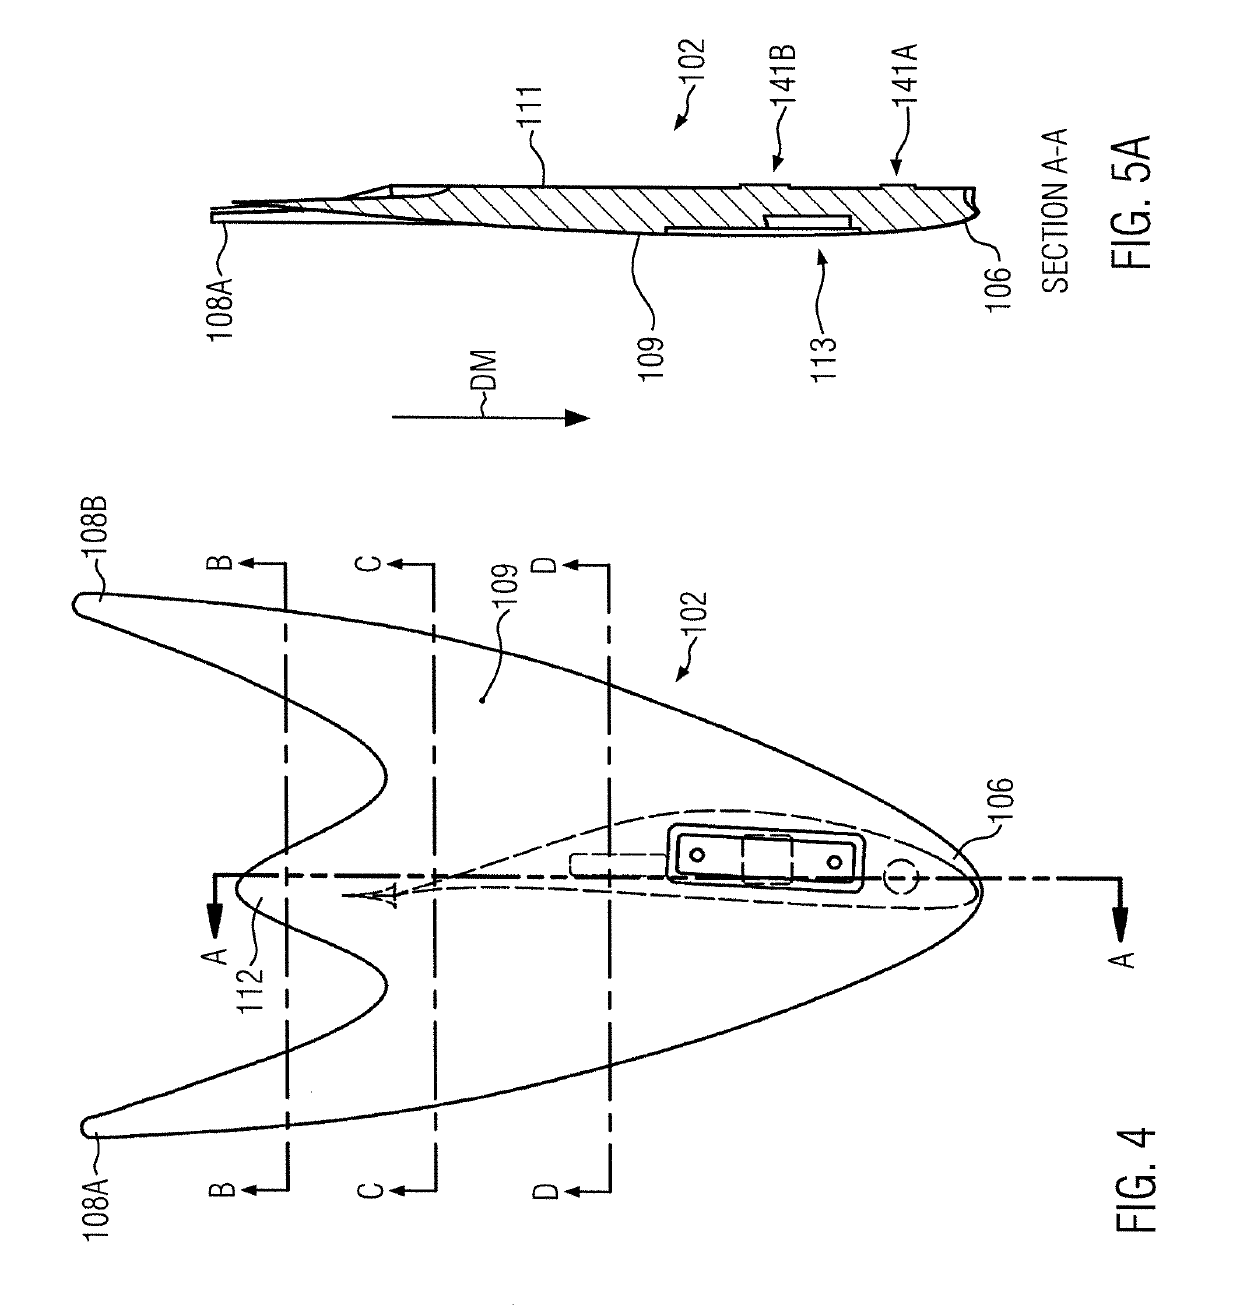 Mountable wing tip device for mounting on a rotor blade of a wind turbine arrangement